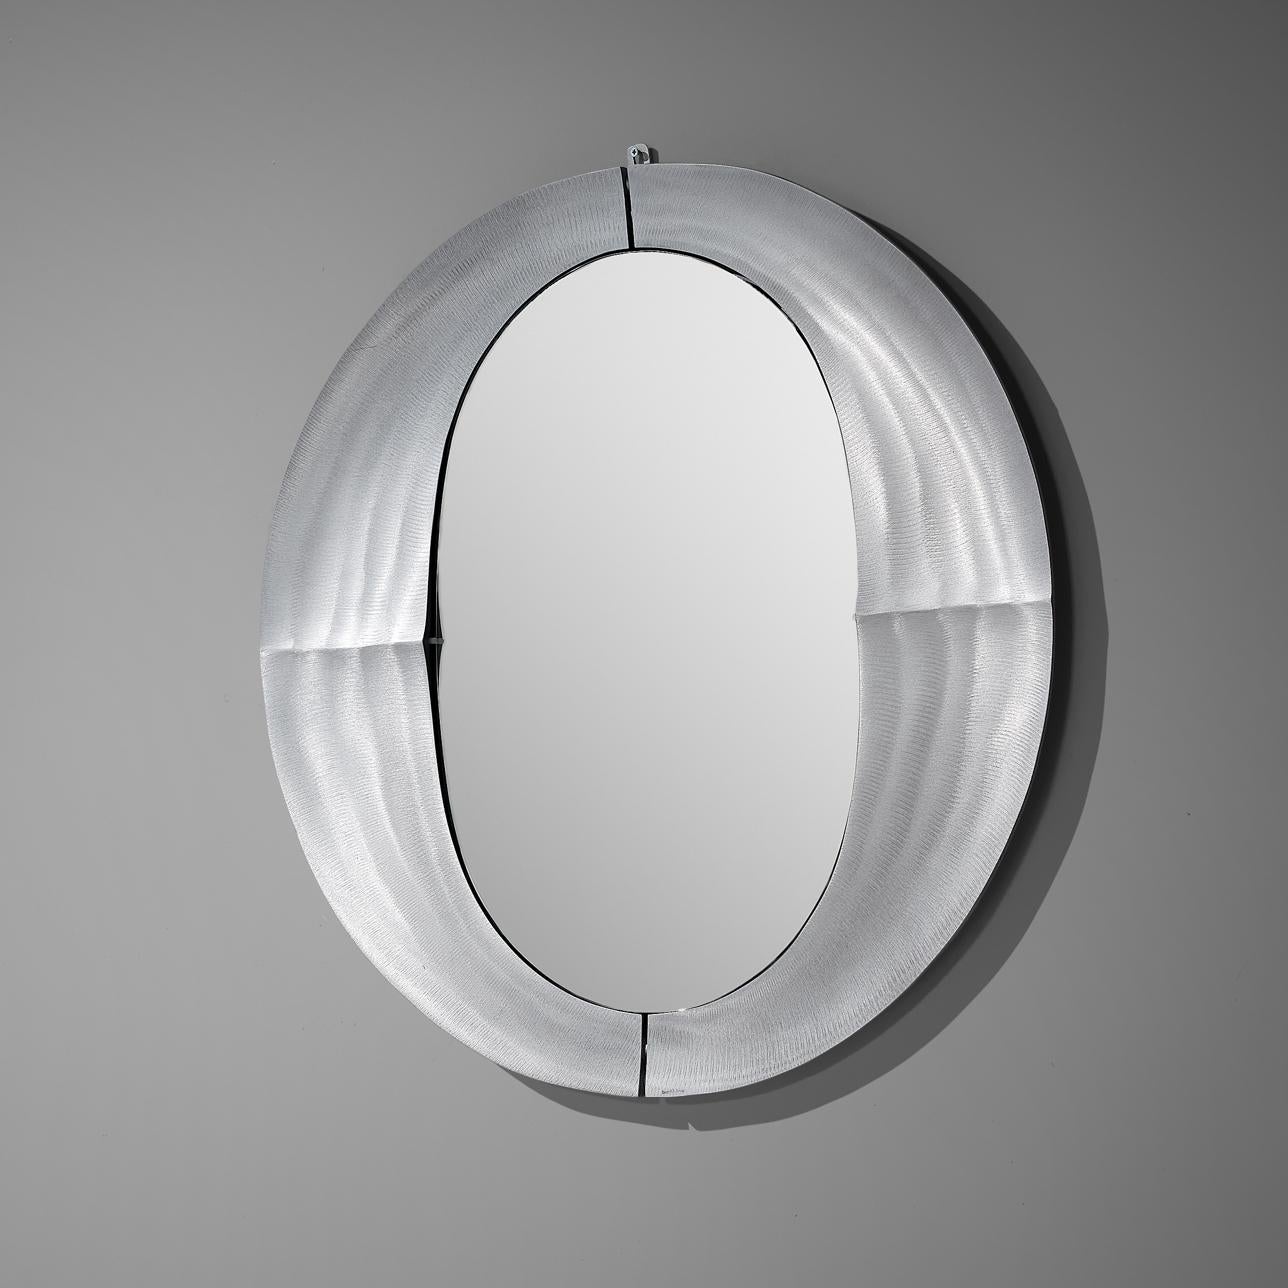 Lorenzo Burchiellaro, wall mirrors, model ‘Cuccaro’, cast aluminum, glass, Italy, 1970s 

This magnificent ‘Cuccaro’ wall mirror is created by Italian designer and sculptor Lorenzo Burchiellaro. He is recognized for his expertise in the use of